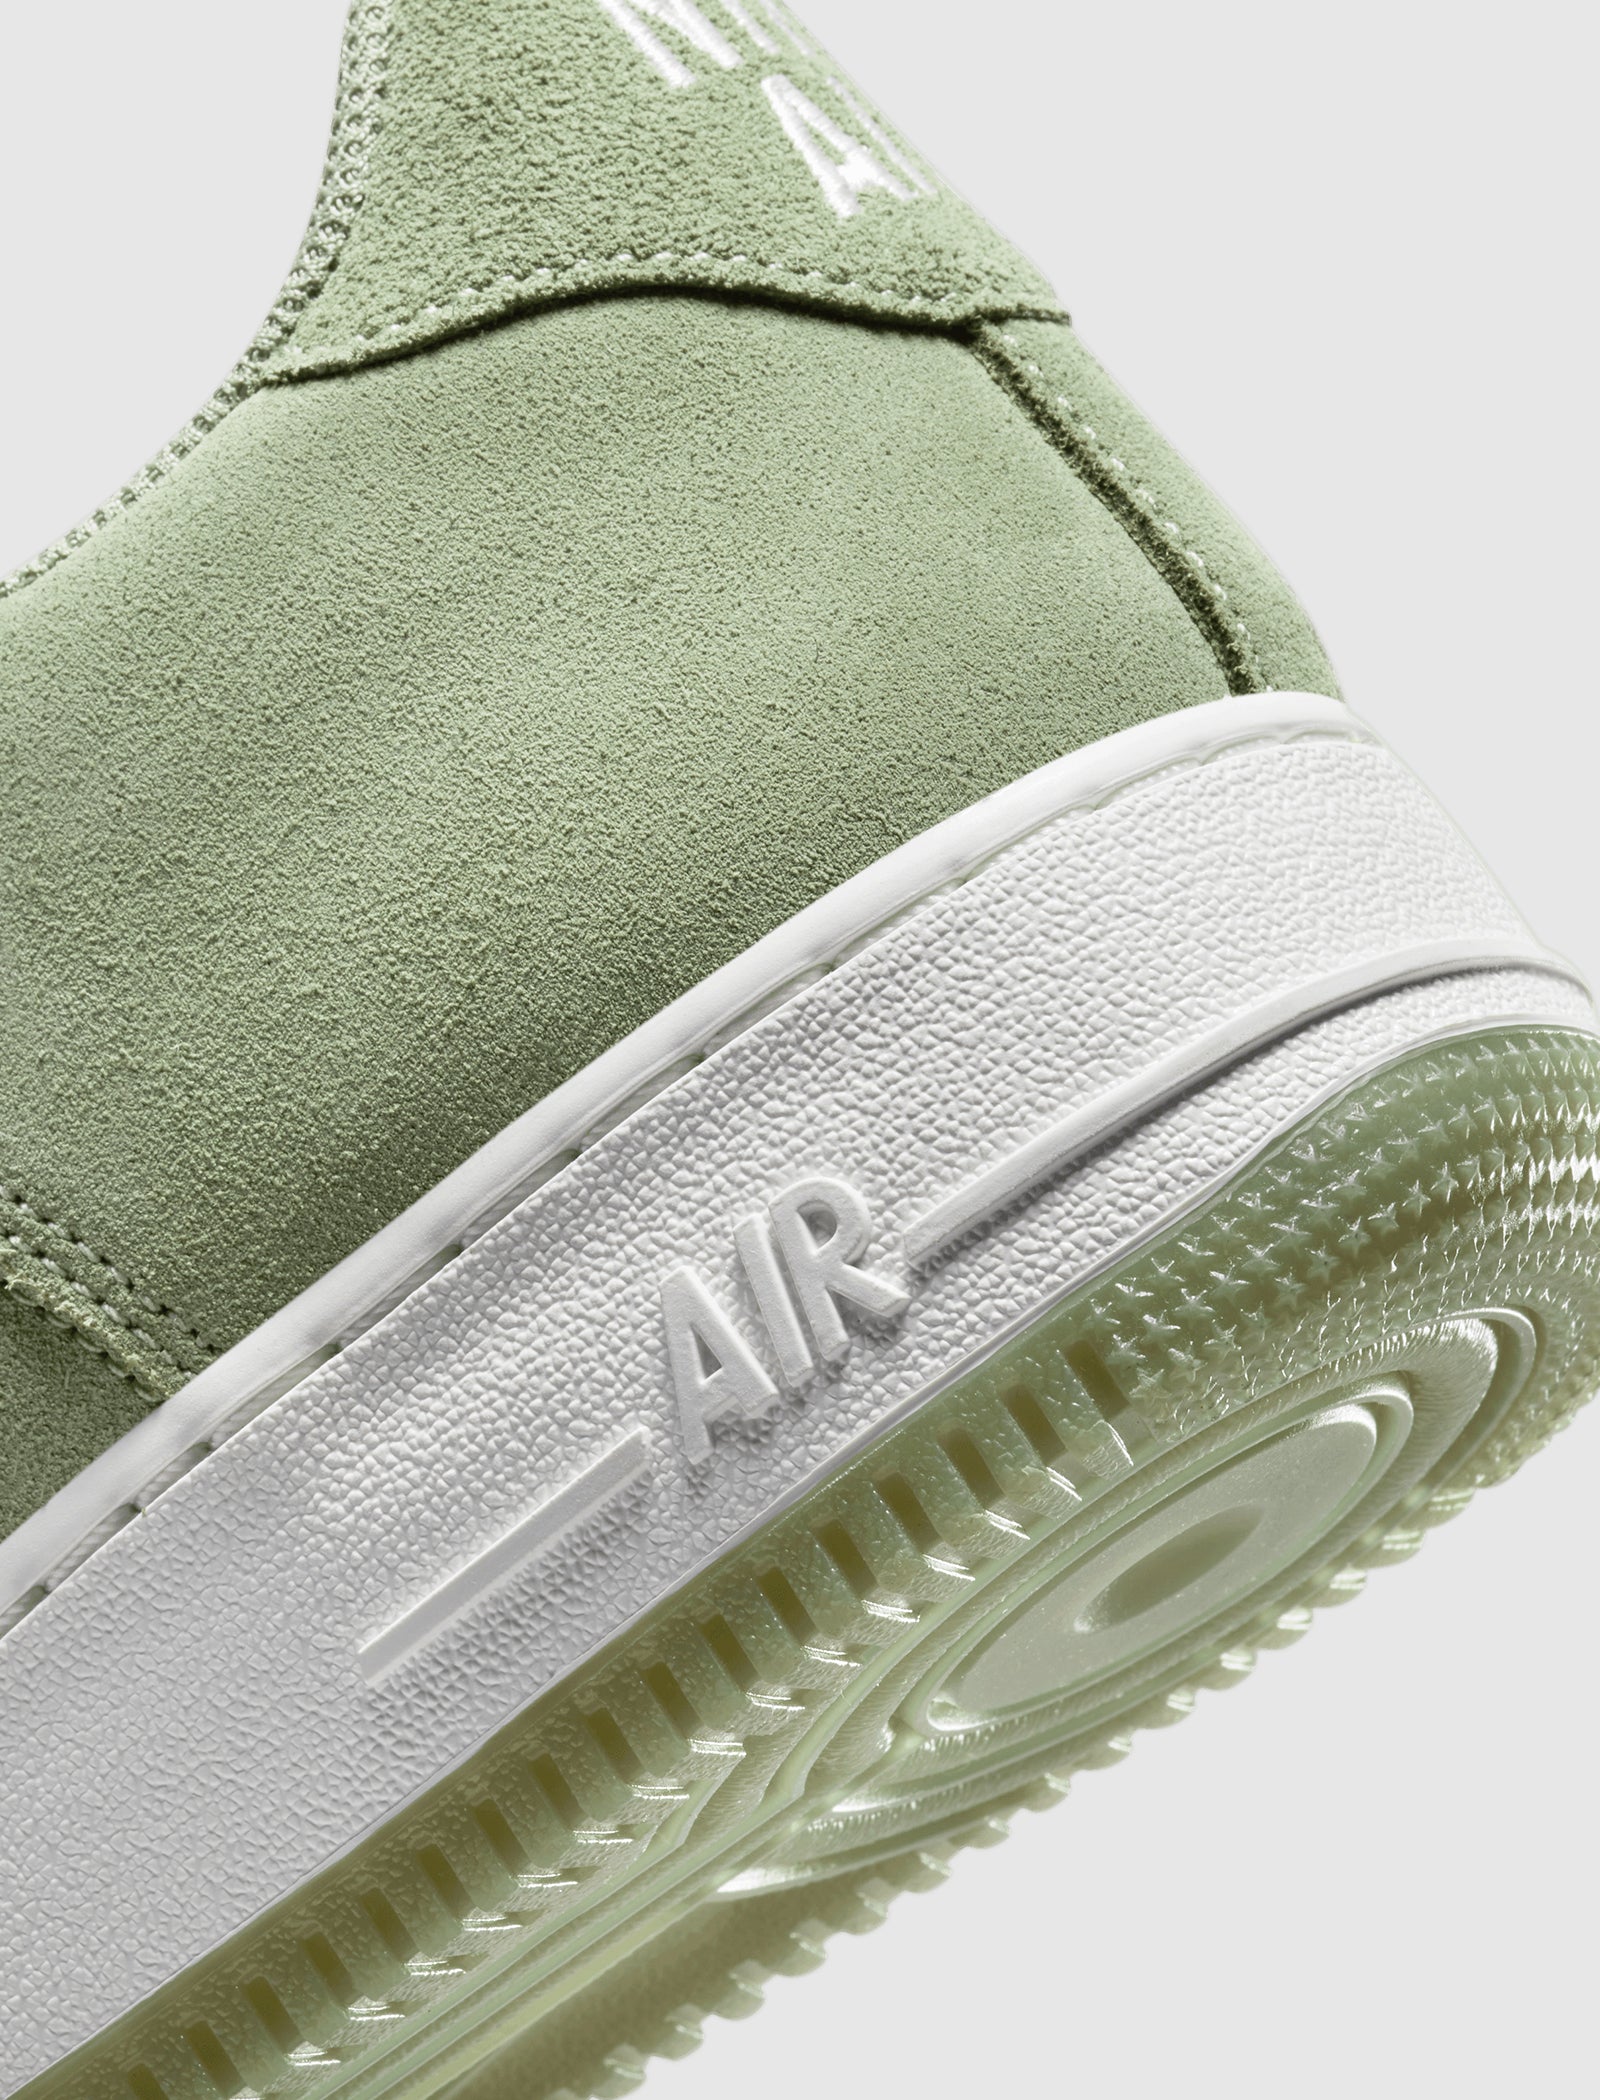 Nike Air Force 1 Low - Suede Green White Low 10.5 Men